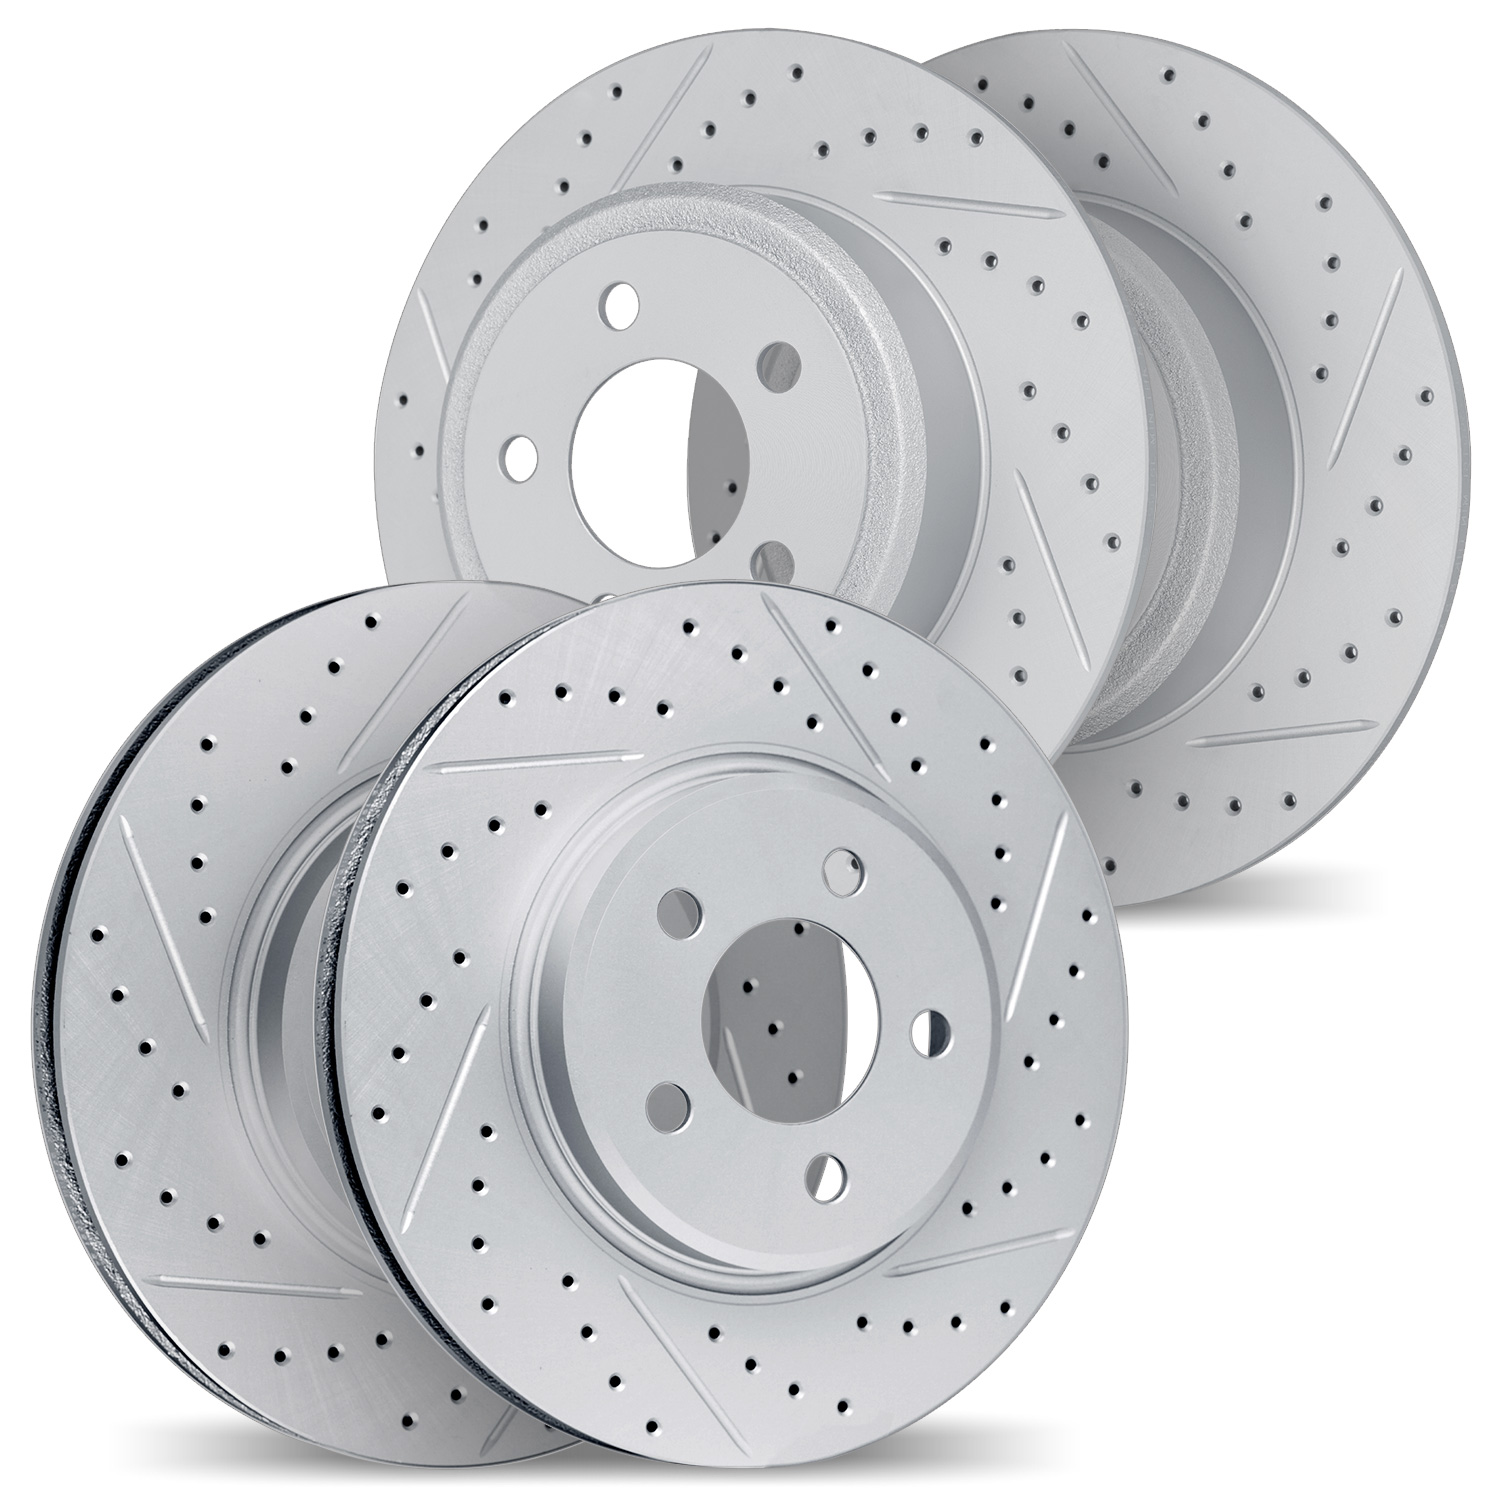 2004-40065 Geoperformance Drilled/Slotted Brake Rotors, 2008-2018 Mercedes-Benz, Position: Front and Rear